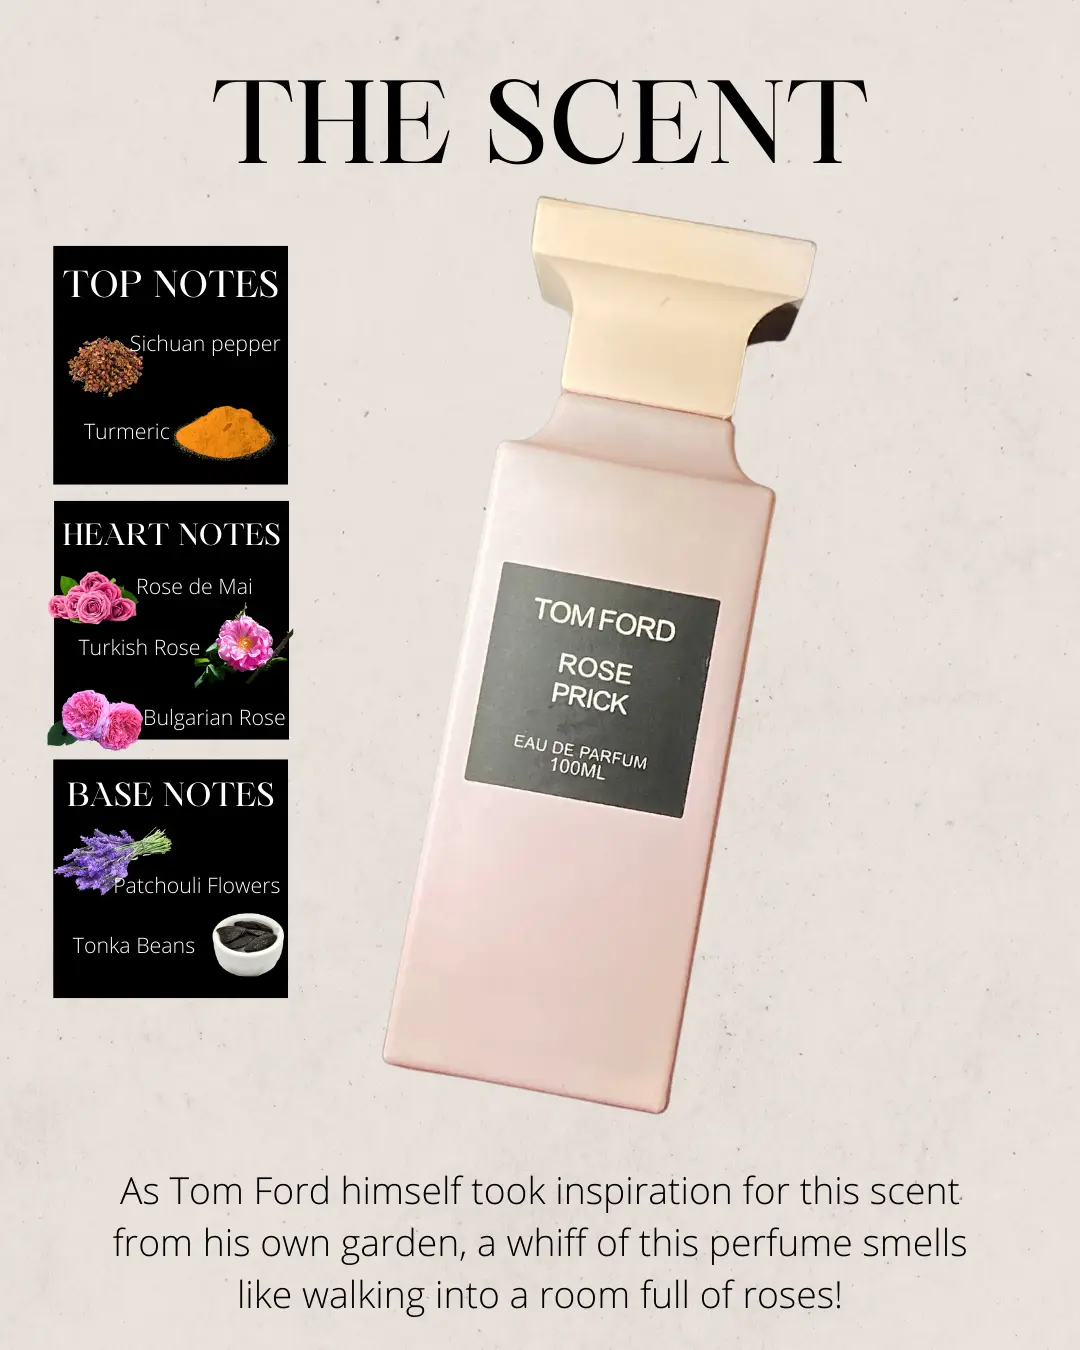 Tom Ford - Rose Prick EDP (Review) | Gallery posted by Adelaide | Lemon8